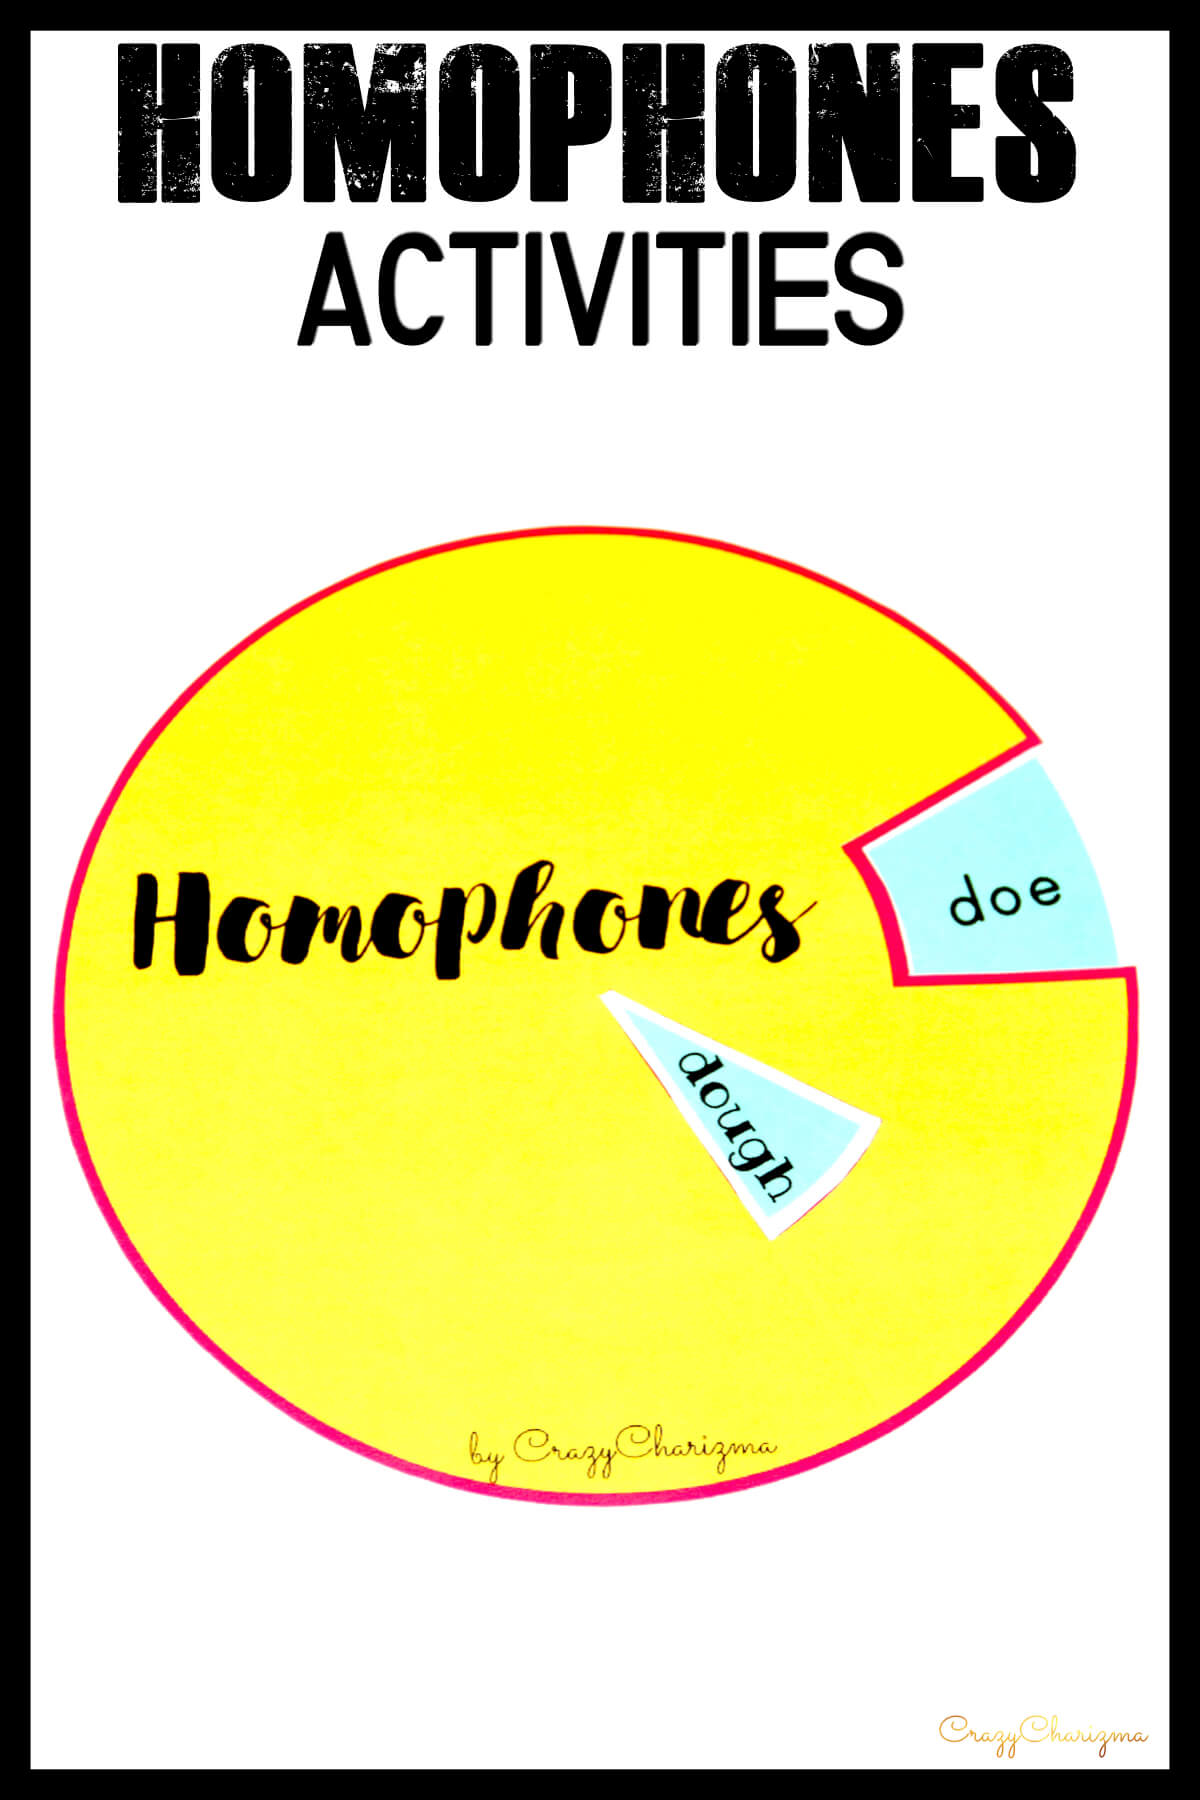 Homophones activities - Wheels are a fun way to introduce, practice or assess homophones. Use for classwork (pairwork or teamwork) or assessment. These 84 pairs of homophones will help your students prepare for state testing (supports common core standards)!